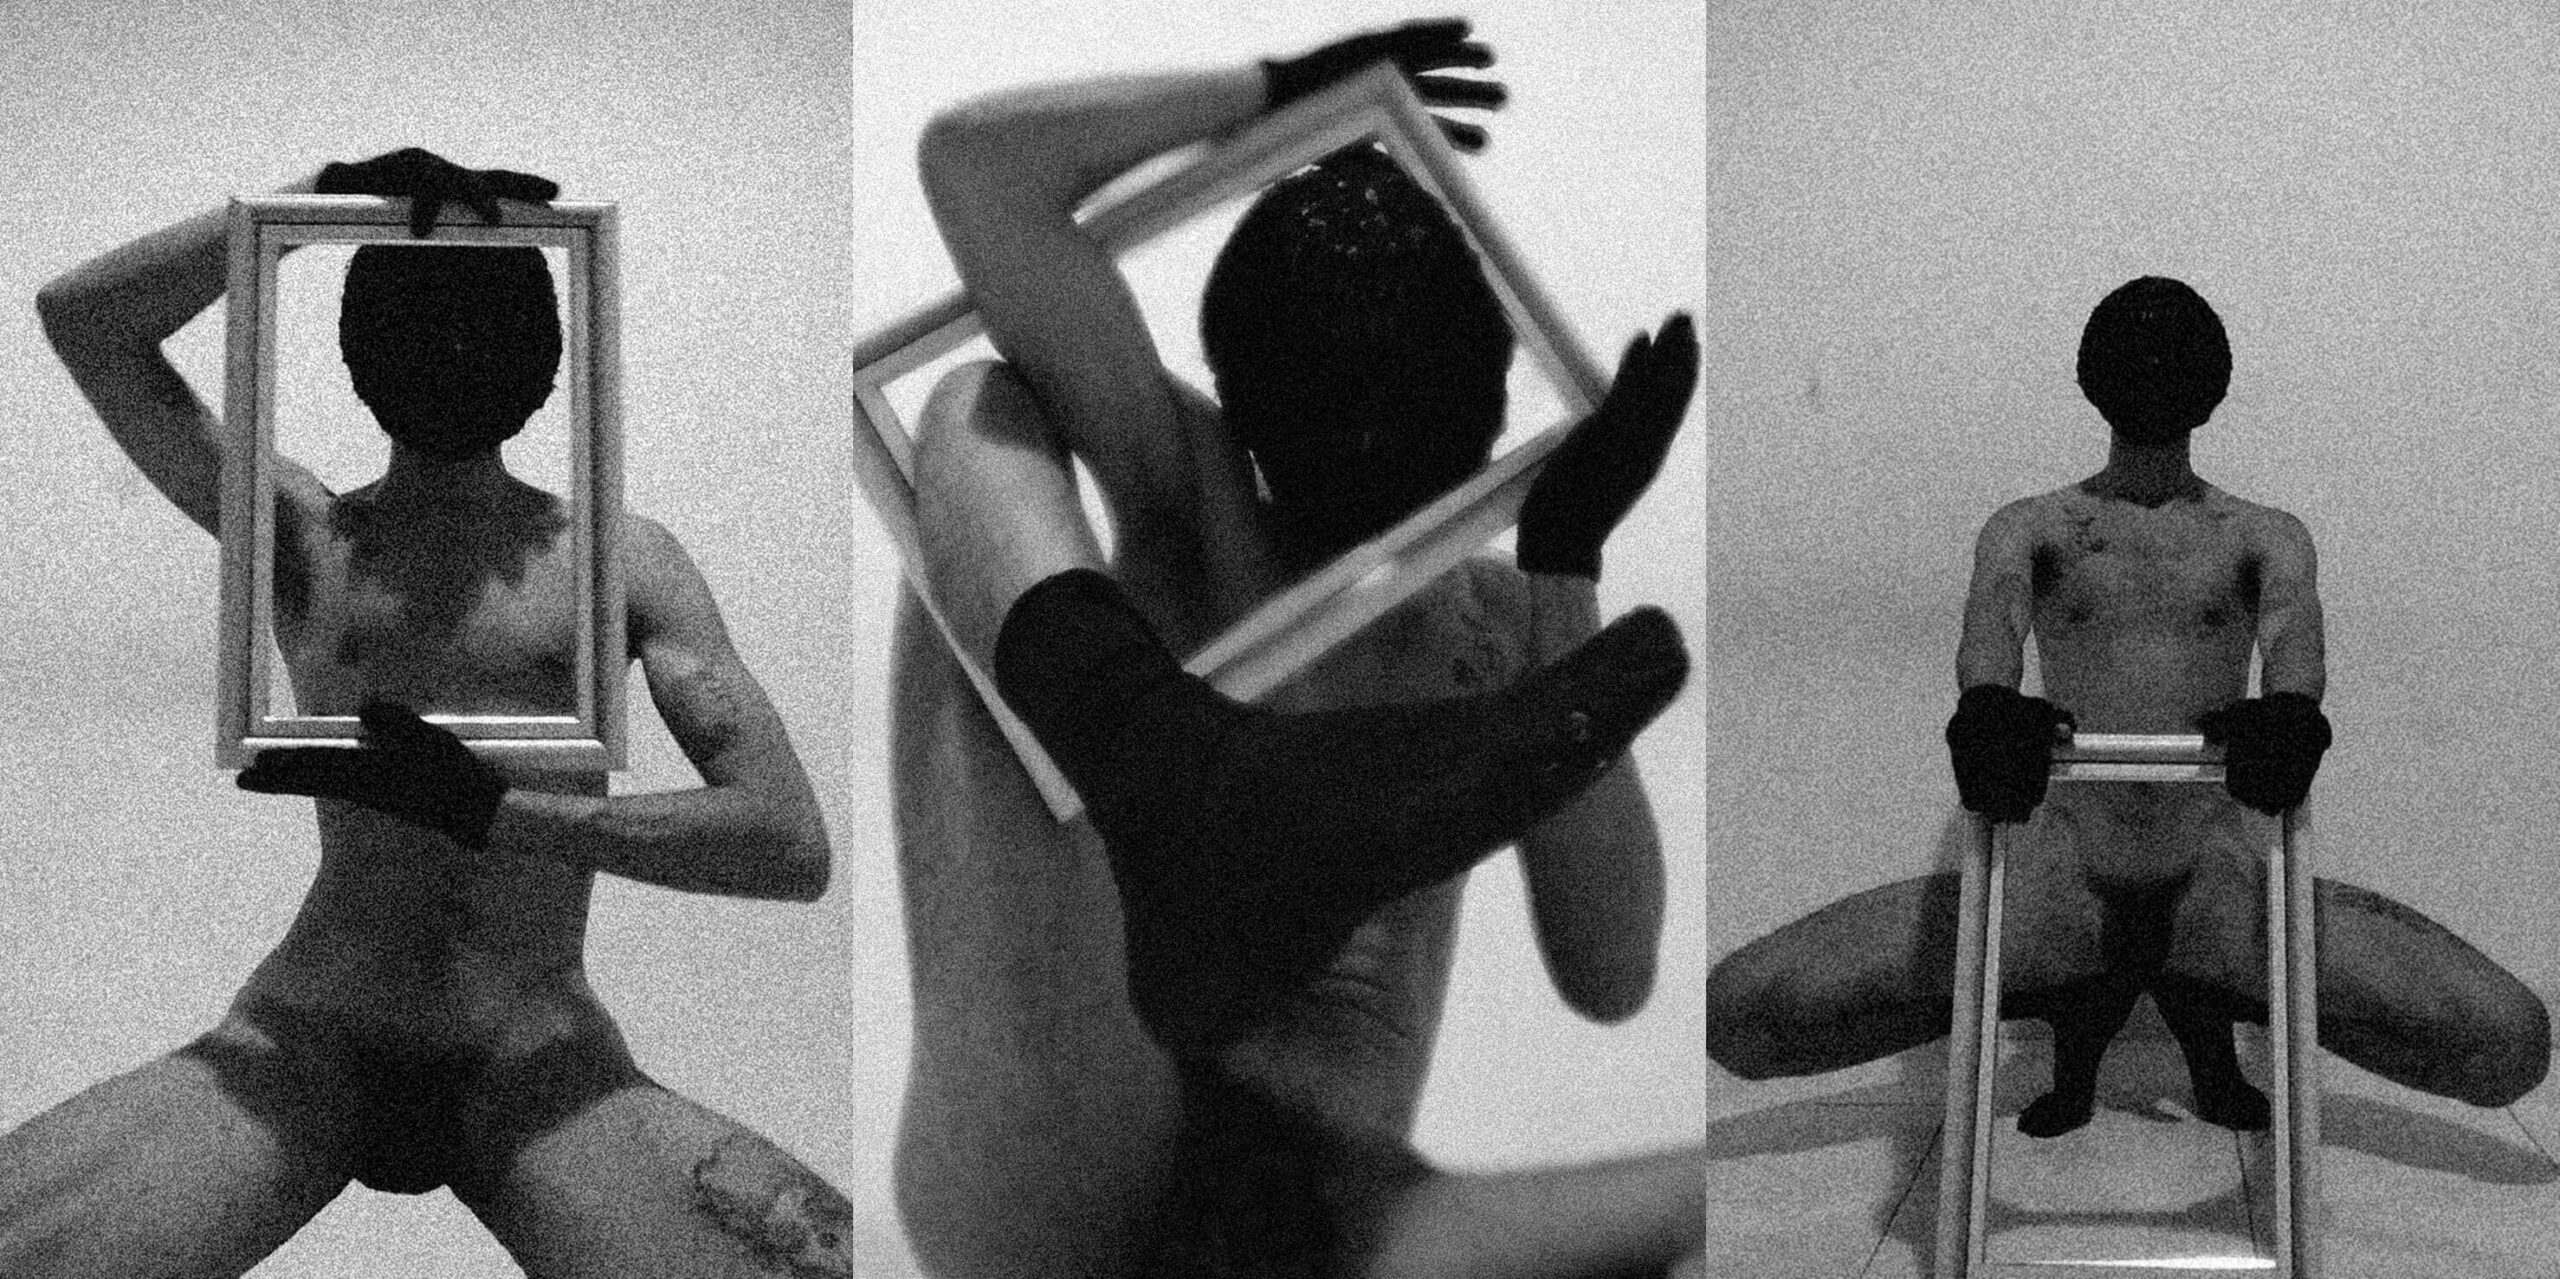 A triptych of 3 grainy black and white photos of a figure holding a picture frame and arranging her body around it. She’s wearing a face covering, gloves, and socks.